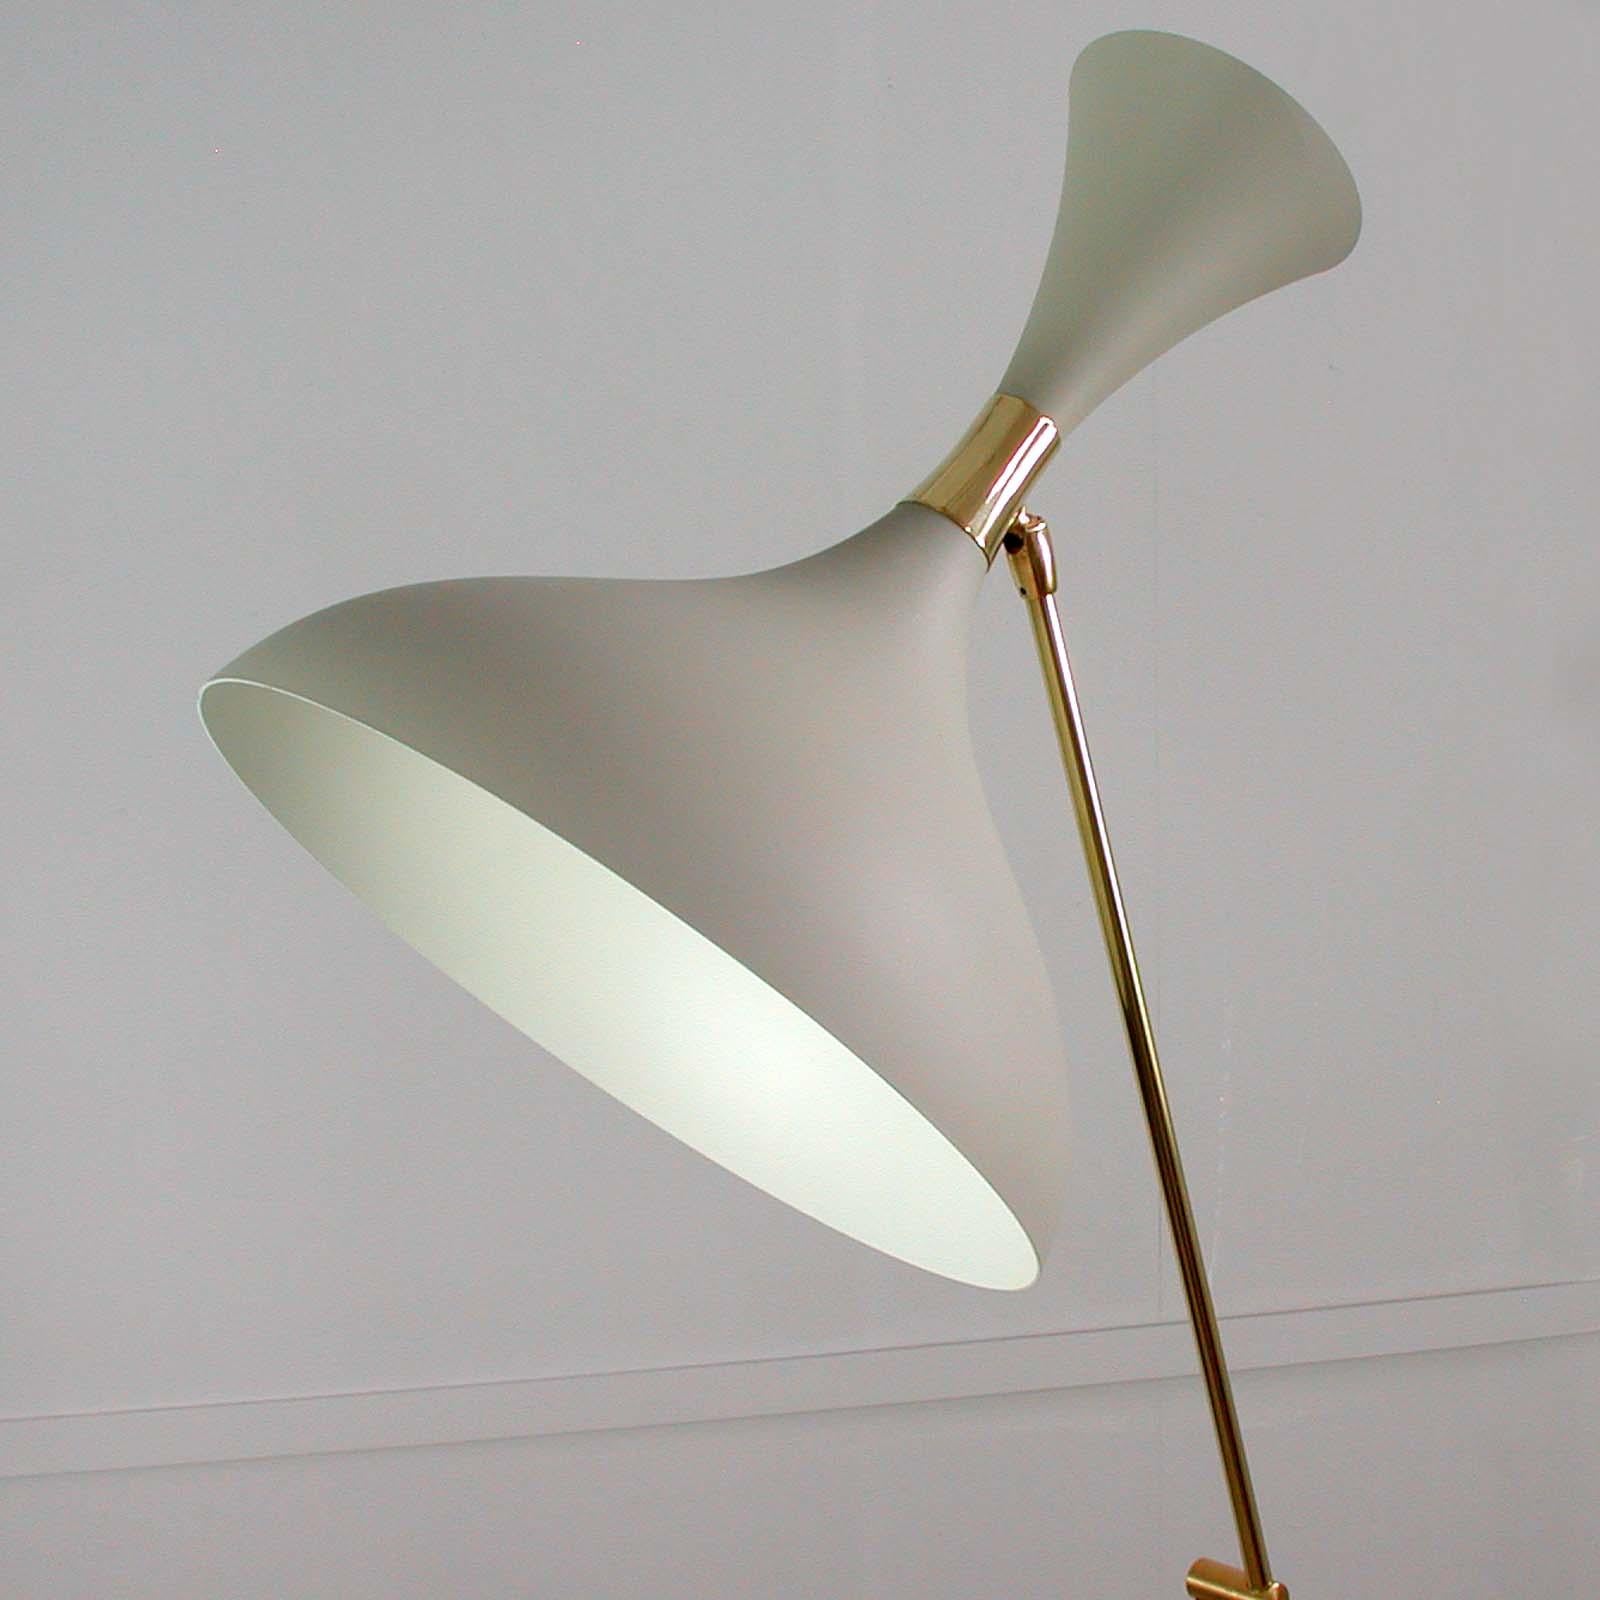 This awesome light grey and brass counterweight floor lamp in the manner of Pierre Guariche or Jean Boris Lacroix was designed and manufactured in France in the 1950s.

The lamp has got a 